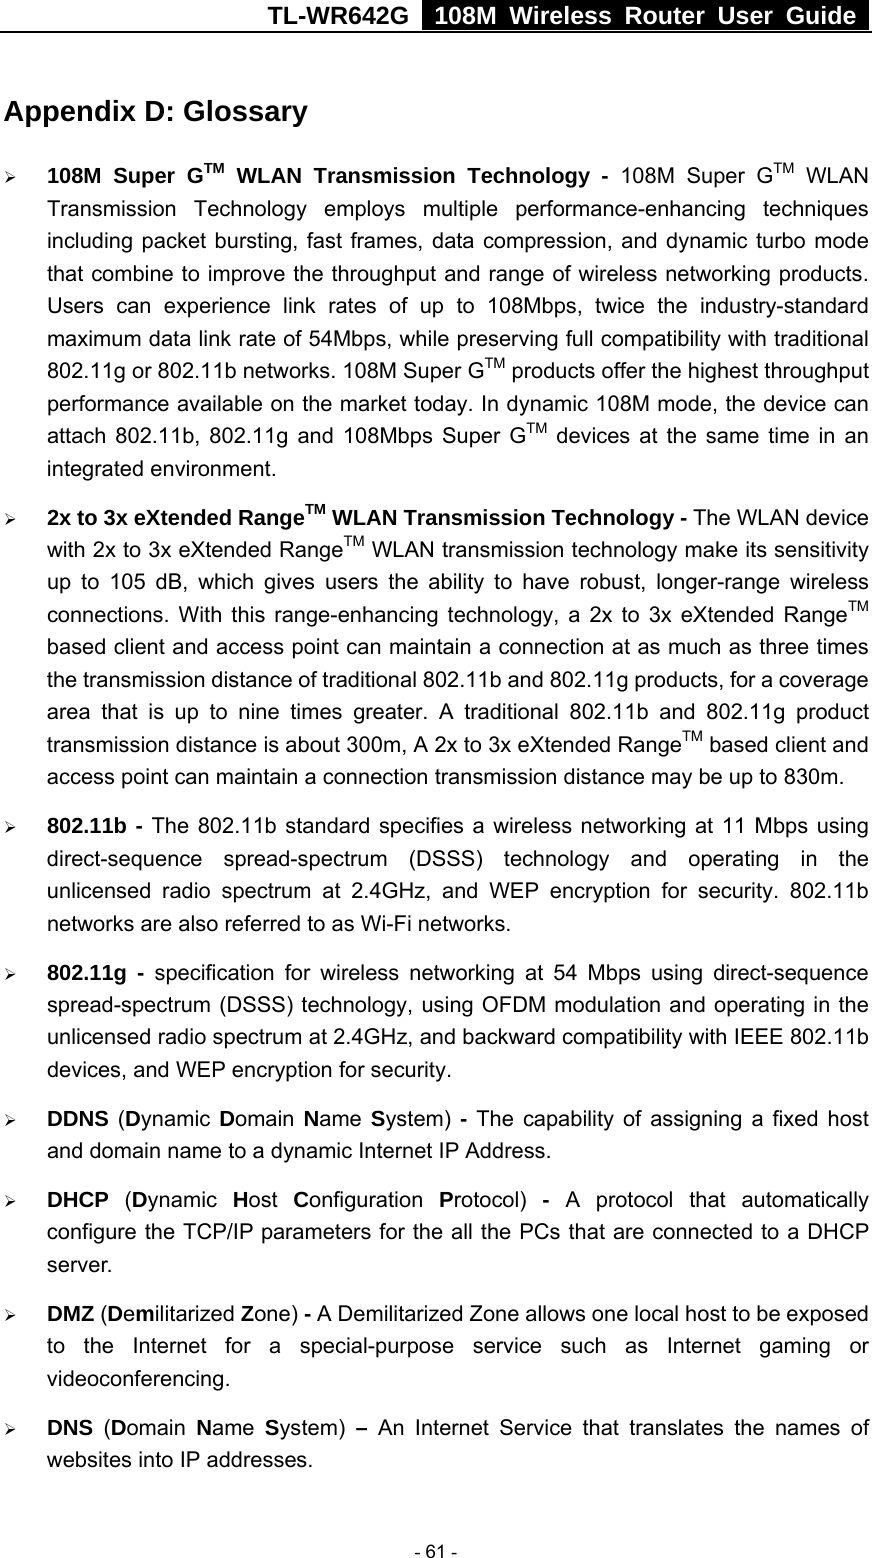 TL-WR642G   108M Wireless Router User Guide   - 61 - Appendix D: Glossary ¾ 108M Super GTM WLAN Transmission Technology - 108M Super GTM WLAN Transmission Technology employs multiple performance-enhancing techniques including packet bursting, fast frames, data compression, and dynamic turbo mode that combine to improve the throughput and range of wireless networking products. Users can experience link rates of up to 108Mbps, twice the industry-standard maximum data link rate of 54Mbps, while preserving full compatibility with traditional 802.11g or 802.11b networks. 108M Super GTM products offer the highest throughput performance available on the market today. In dynamic 108M mode, the device can attach 802.11b, 802.11g and 108Mbps Super GTM devices at the same time in an integrated environment. ¾ 2x to 3x eXtended RangeTM WLAN Transmission Technology - The WLAN device with 2x to 3x eXtended RangeTM WLAN transmission technology make its sensitivity up to 105 dB, which gives users the ability to have robust, longer-range wireless connections. With this range-enhancing technology, a 2x to 3x eXtended RangeTM based client and access point can maintain a connection at as much as three times the transmission distance of traditional 802.11b and 802.11g products, for a coverage area that is up to nine times greater. A traditional 802.11b and 802.11g product transmission distance is about 300m, A 2x to 3x eXtended RangeTM based client and access point can maintain a connection transmission distance may be up to 830m. ¾ 802.11b - The 802.11b standard specifies a wireless networking at 11 Mbps using direct-sequence spread-spectrum (DSSS) technology and operating in the unlicensed radio spectrum at 2.4GHz, and WEP encryption for security. 802.11b networks are also referred to as Wi-Fi networks. ¾ 802.11g - specification for wireless networking at 54 Mbps using direct-sequence spread-spectrum (DSSS) technology, using OFDM modulation and operating in the unlicensed radio spectrum at 2.4GHz, and backward compatibility with IEEE 802.11b devices, and WEP encryption for security. ¾ DDNS (Dynamic  Domain  Name  System) - The capability of assigning a fixed host and domain name to a dynamic Internet IP Address.   ¾ DHCP  (Dynamic  Host  Configuration  Protocol)  - A protocol that automatically configure the TCP/IP parameters for the all the PCs that are connected to a DHCP server. ¾ DMZ (Demilitarized Zone) - A Demilitarized Zone allows one local host to be exposed to the Internet for a special-purpose service such as Internet gaming or videoconferencing. ¾ DNS  (Domain  Name  System) – An Internet Service that translates the names of websites into IP addresses. 